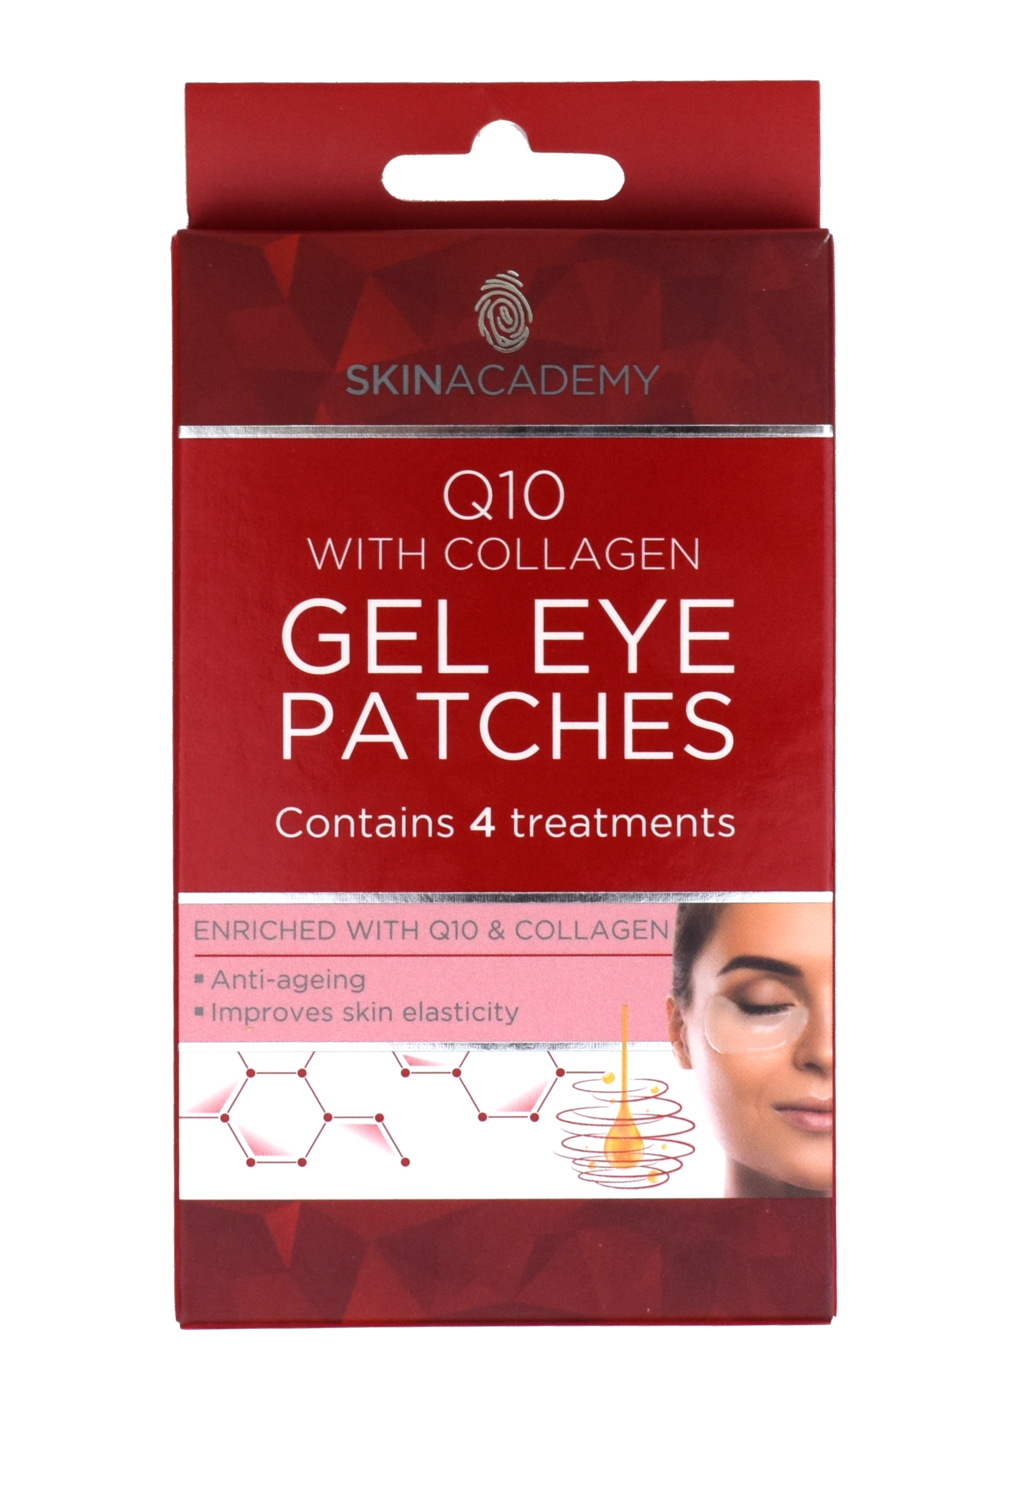 Skin Academy Gel Eye Patches - Q10 with Collagen, 4 Pairs